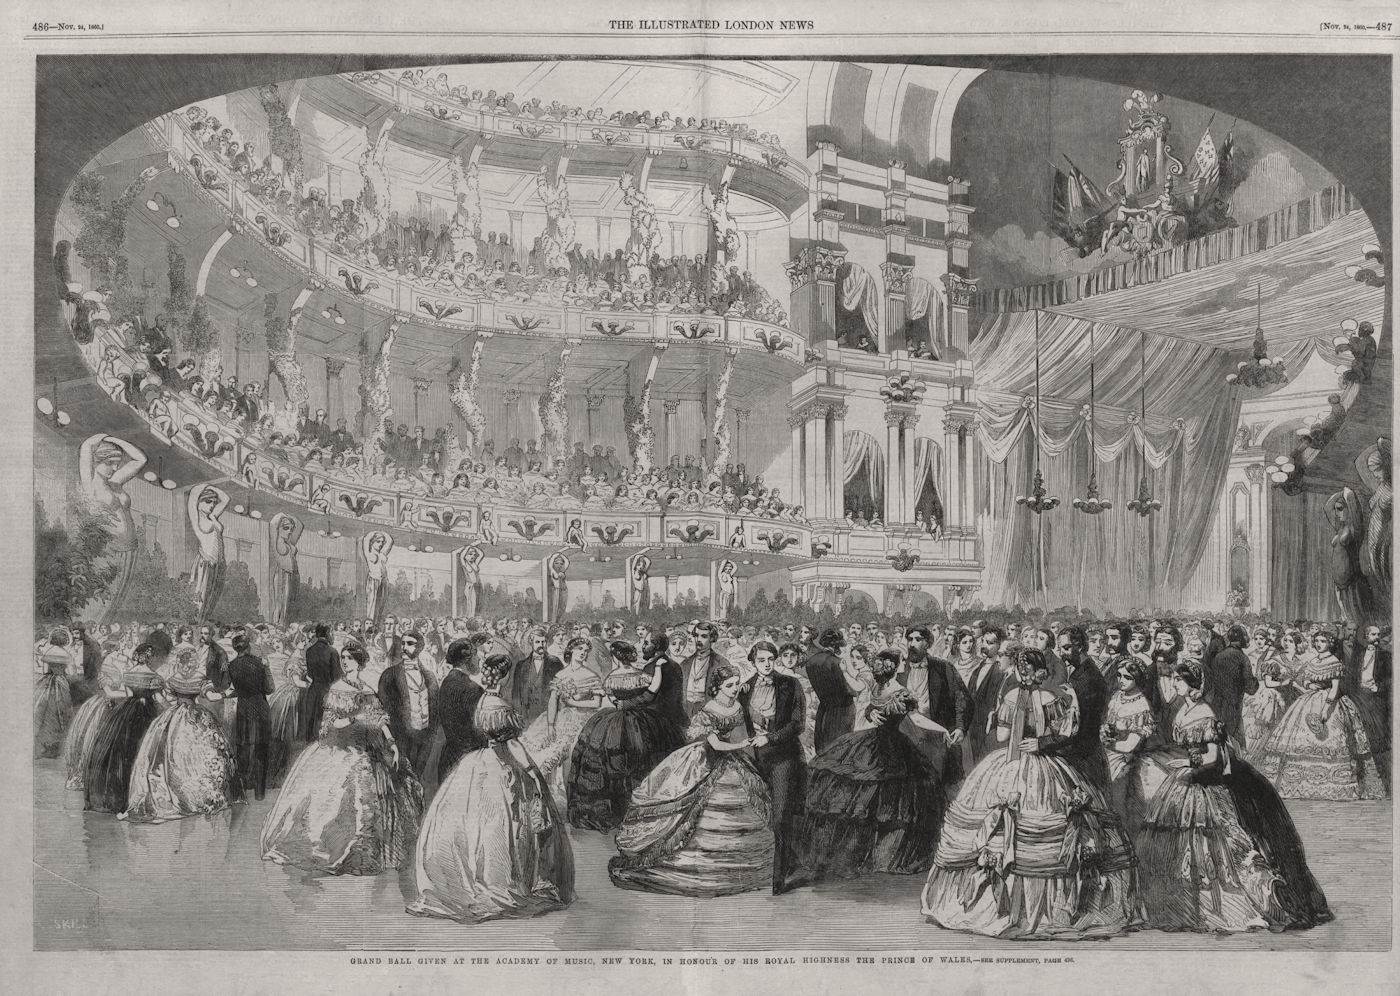 Academy of Music New York. Grand Ball for Prince of Wales (Edward VII) 1860